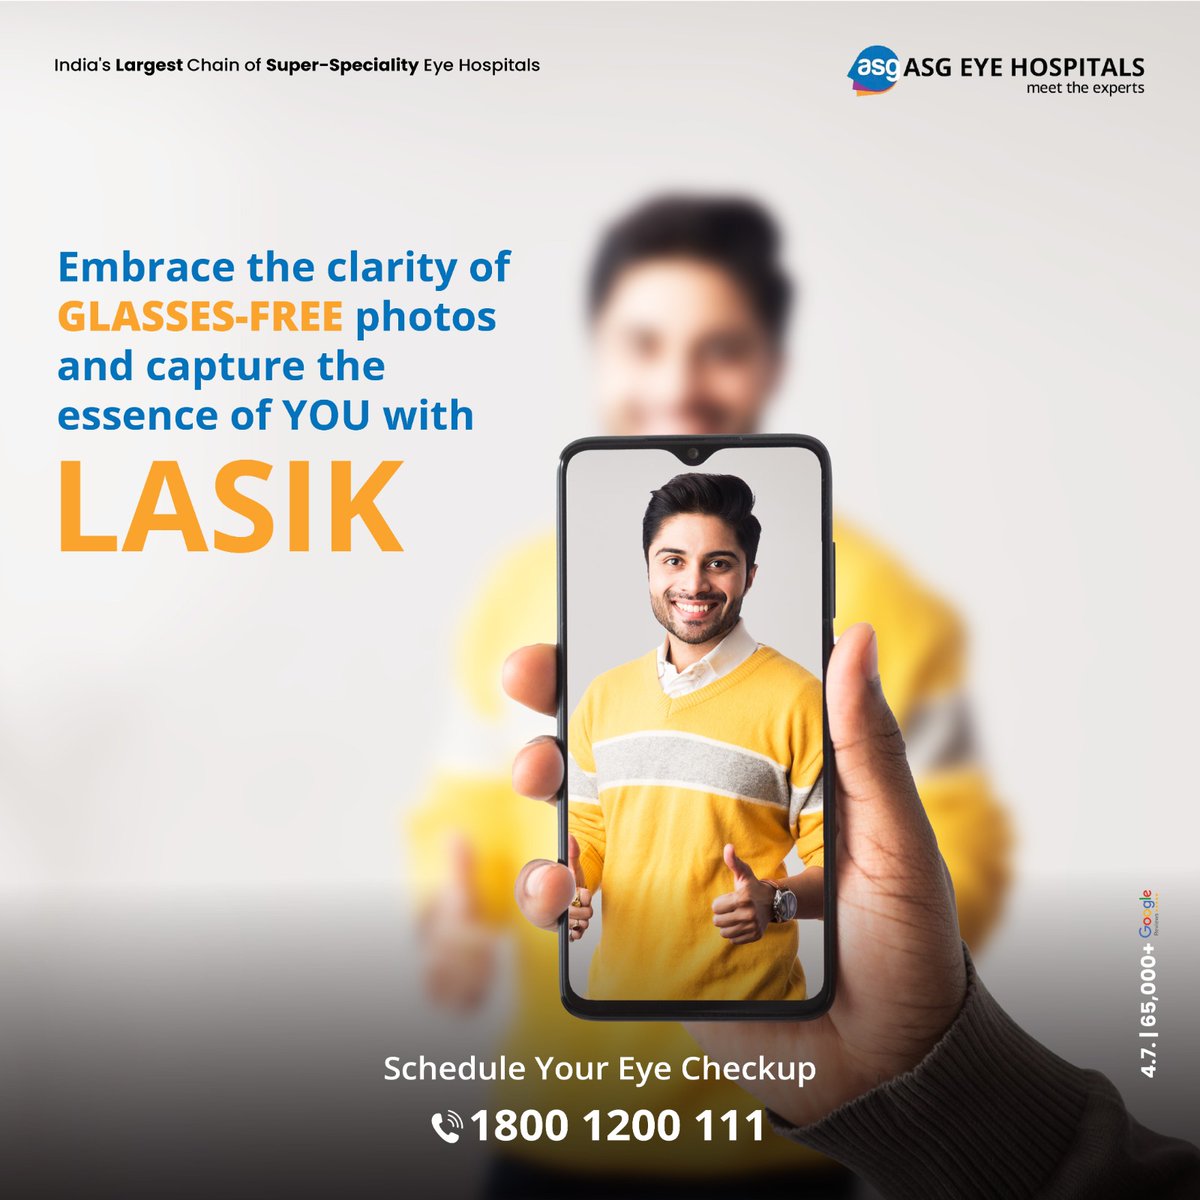 See yourself in a new light! Experience the freedom of perfect vision With LASIK. Your journey to a clearer vision starts now!

#asgeyehospitals #asgeyecare #lasiksurgery #lasik #eyecare #lasikeyesurgery #eyesurgery #eyedoctor #vision #eyehospital #optometrist #eyespecialist